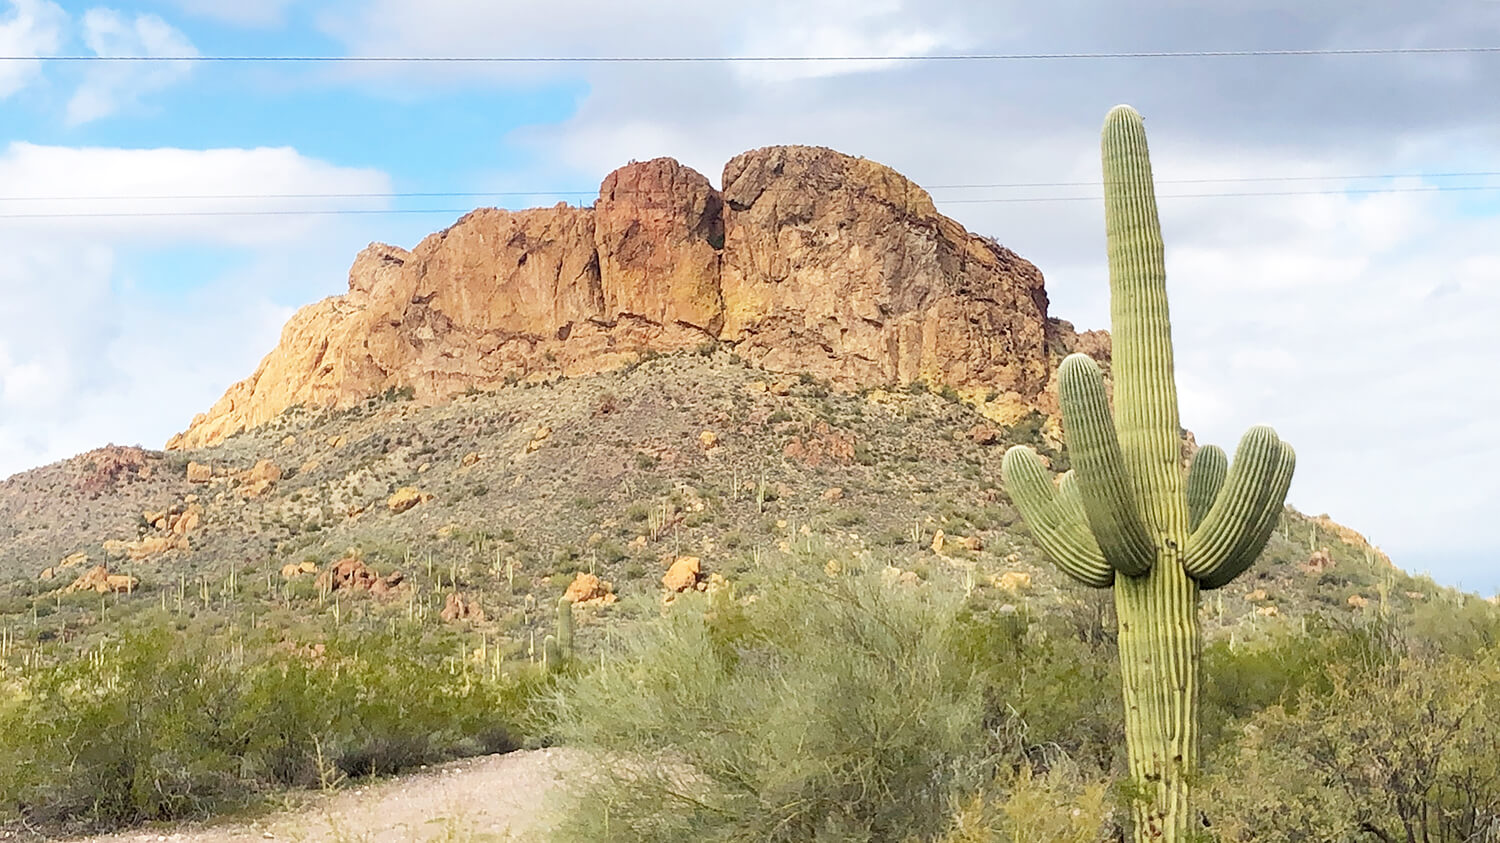 Visit Mesa Arizona - Travel Guide - Things To Do in Mesa Gilbert Queen Creek Schnepf Farms Superstition Mountains Apache Trail